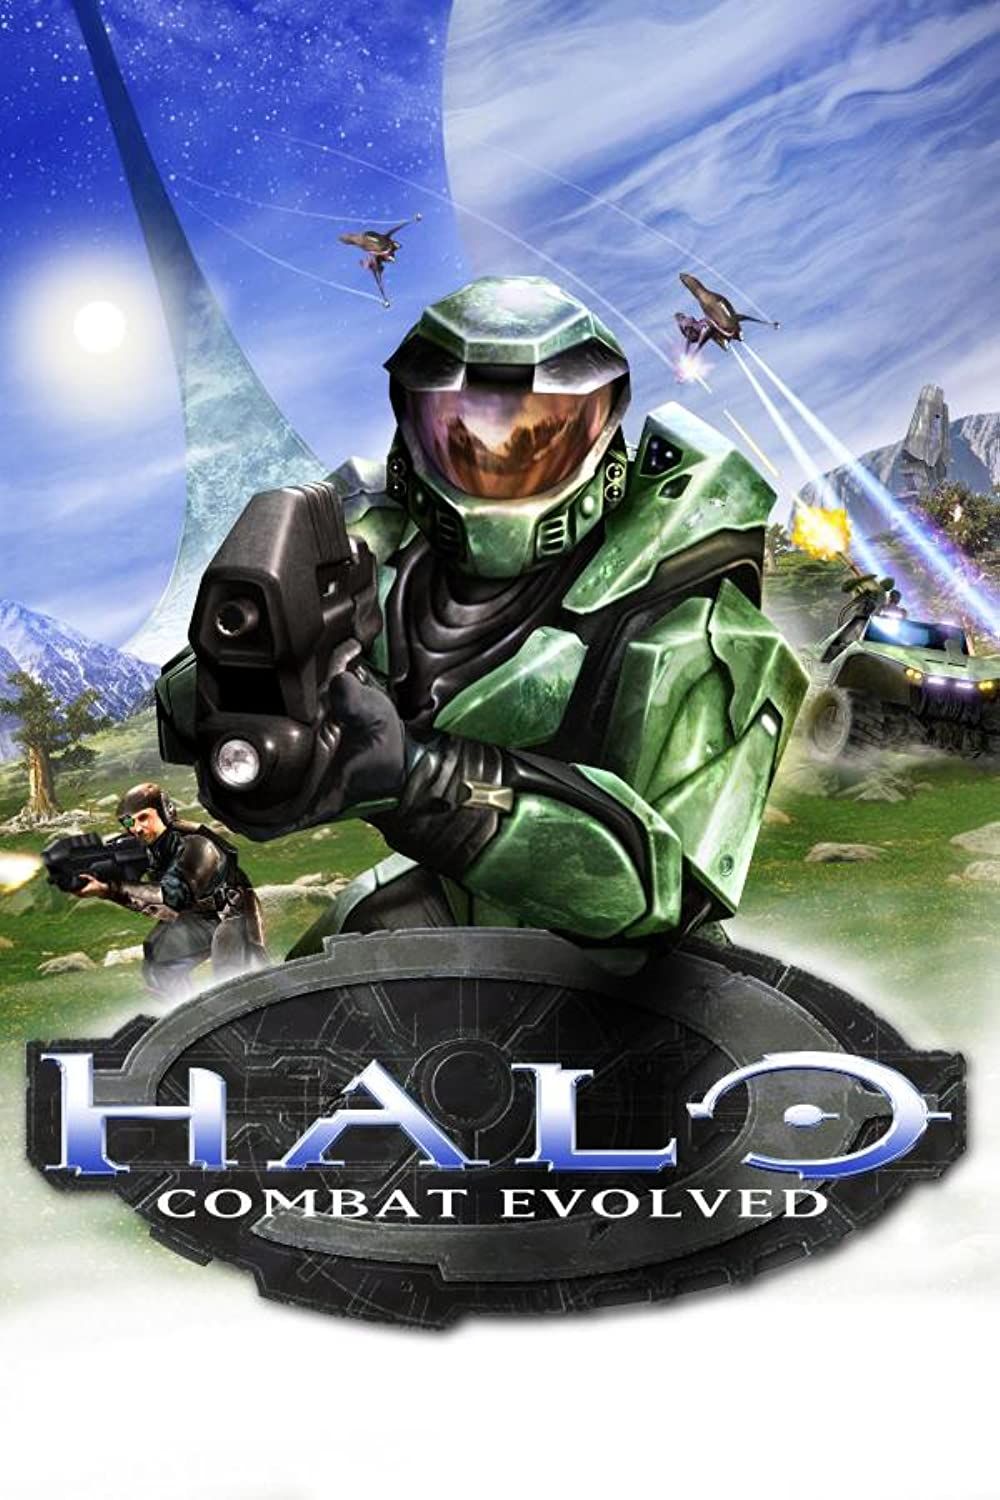 Halo 1 Might Come to PS5